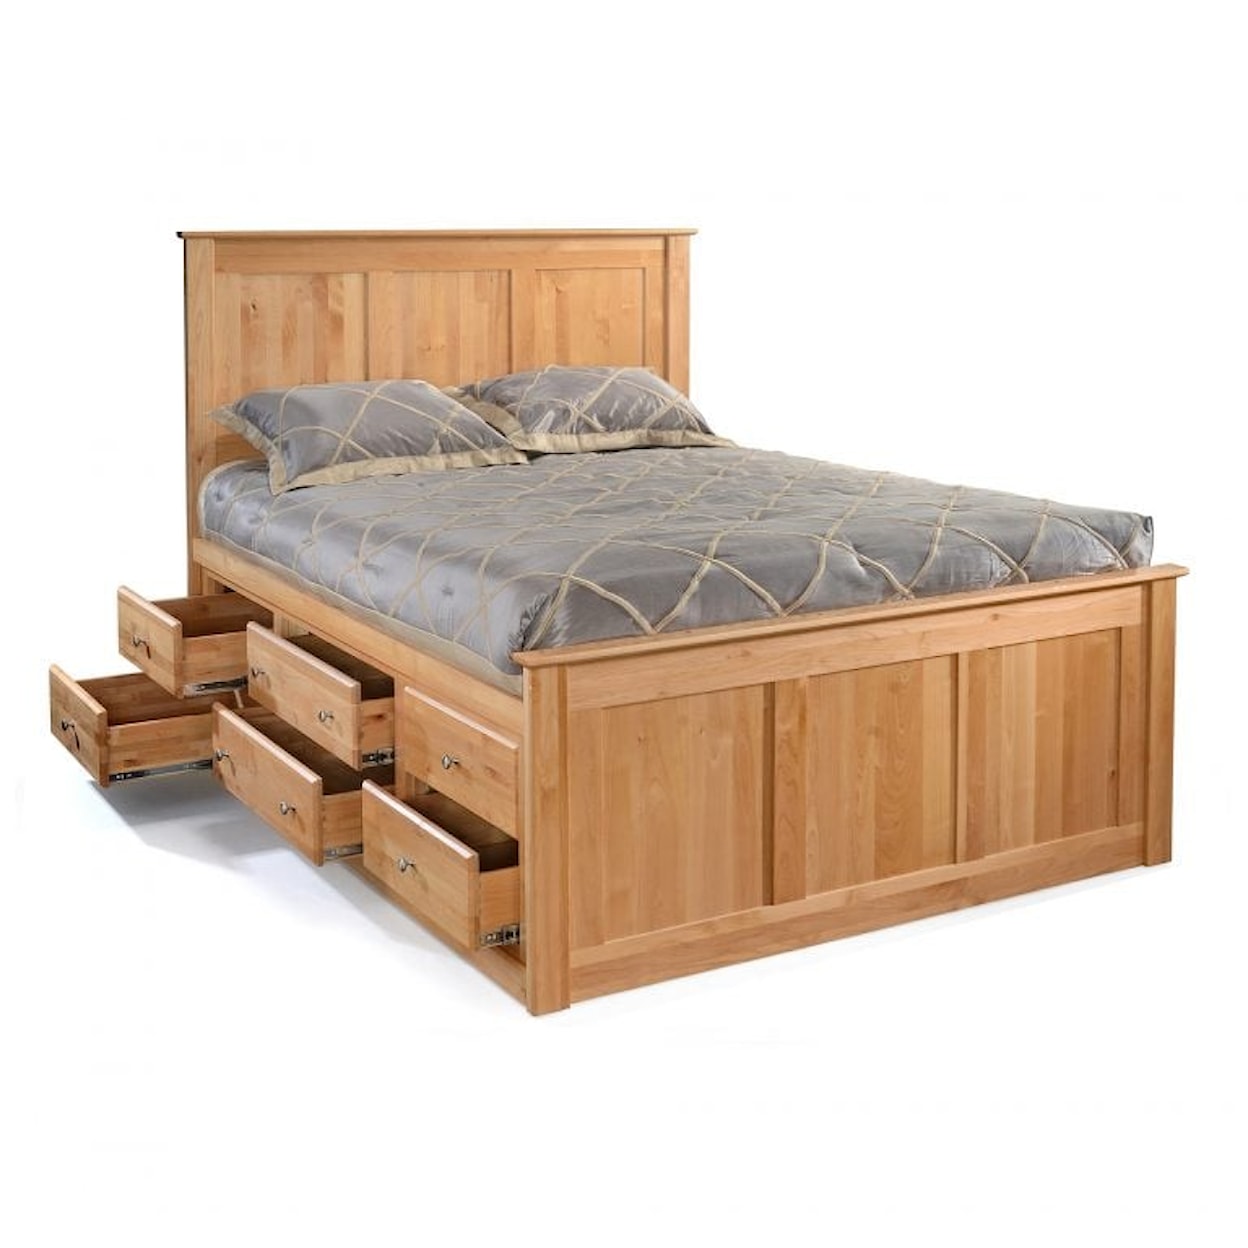 Archbold Furniture Chest Bed King 12-Drawer Chest Bed